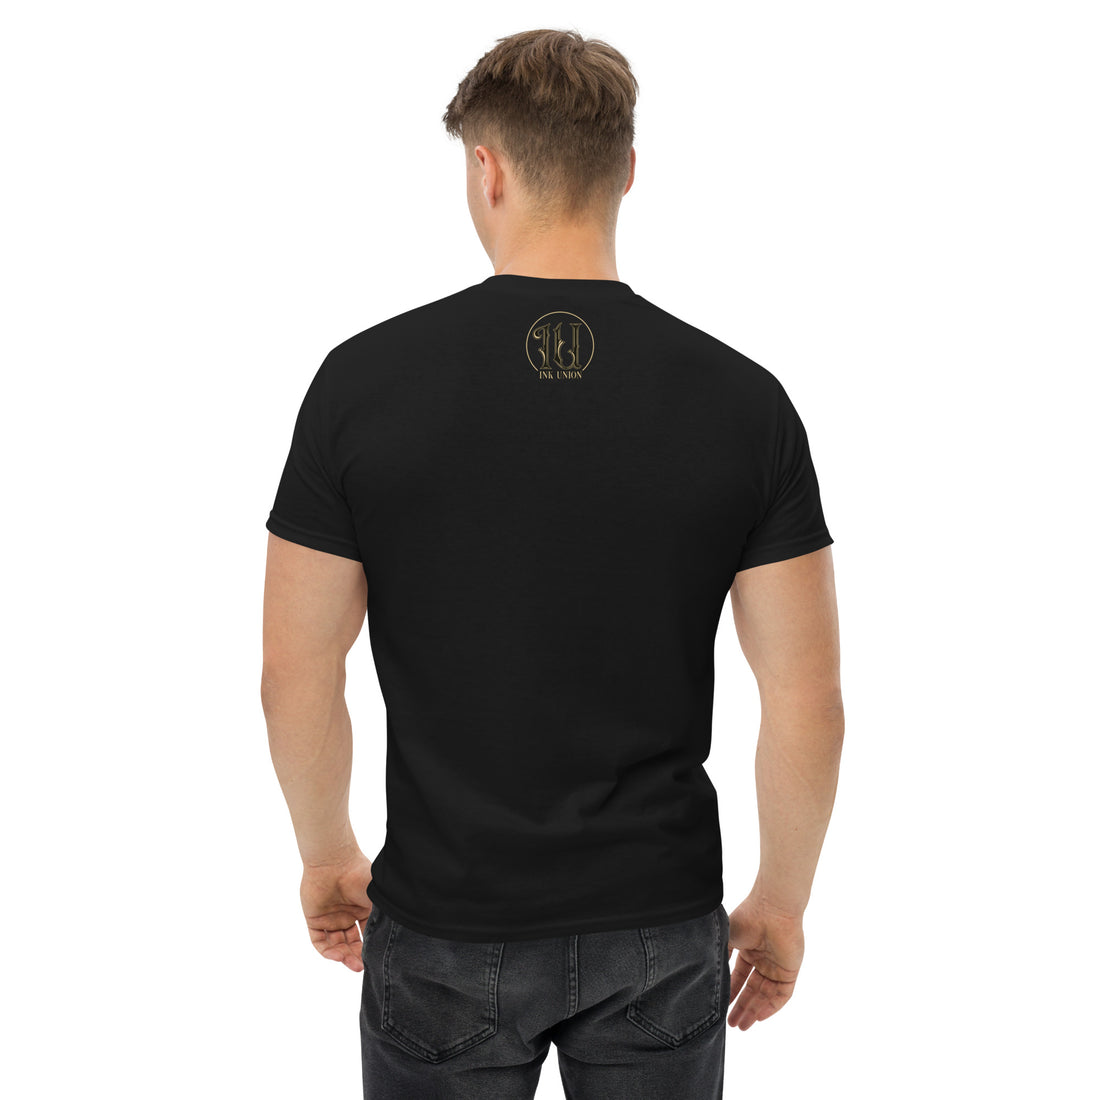 The back view is of an attractive man wearing a black t-shirt with a small gold and black Ink Union ring Logo centered just under the neckline.